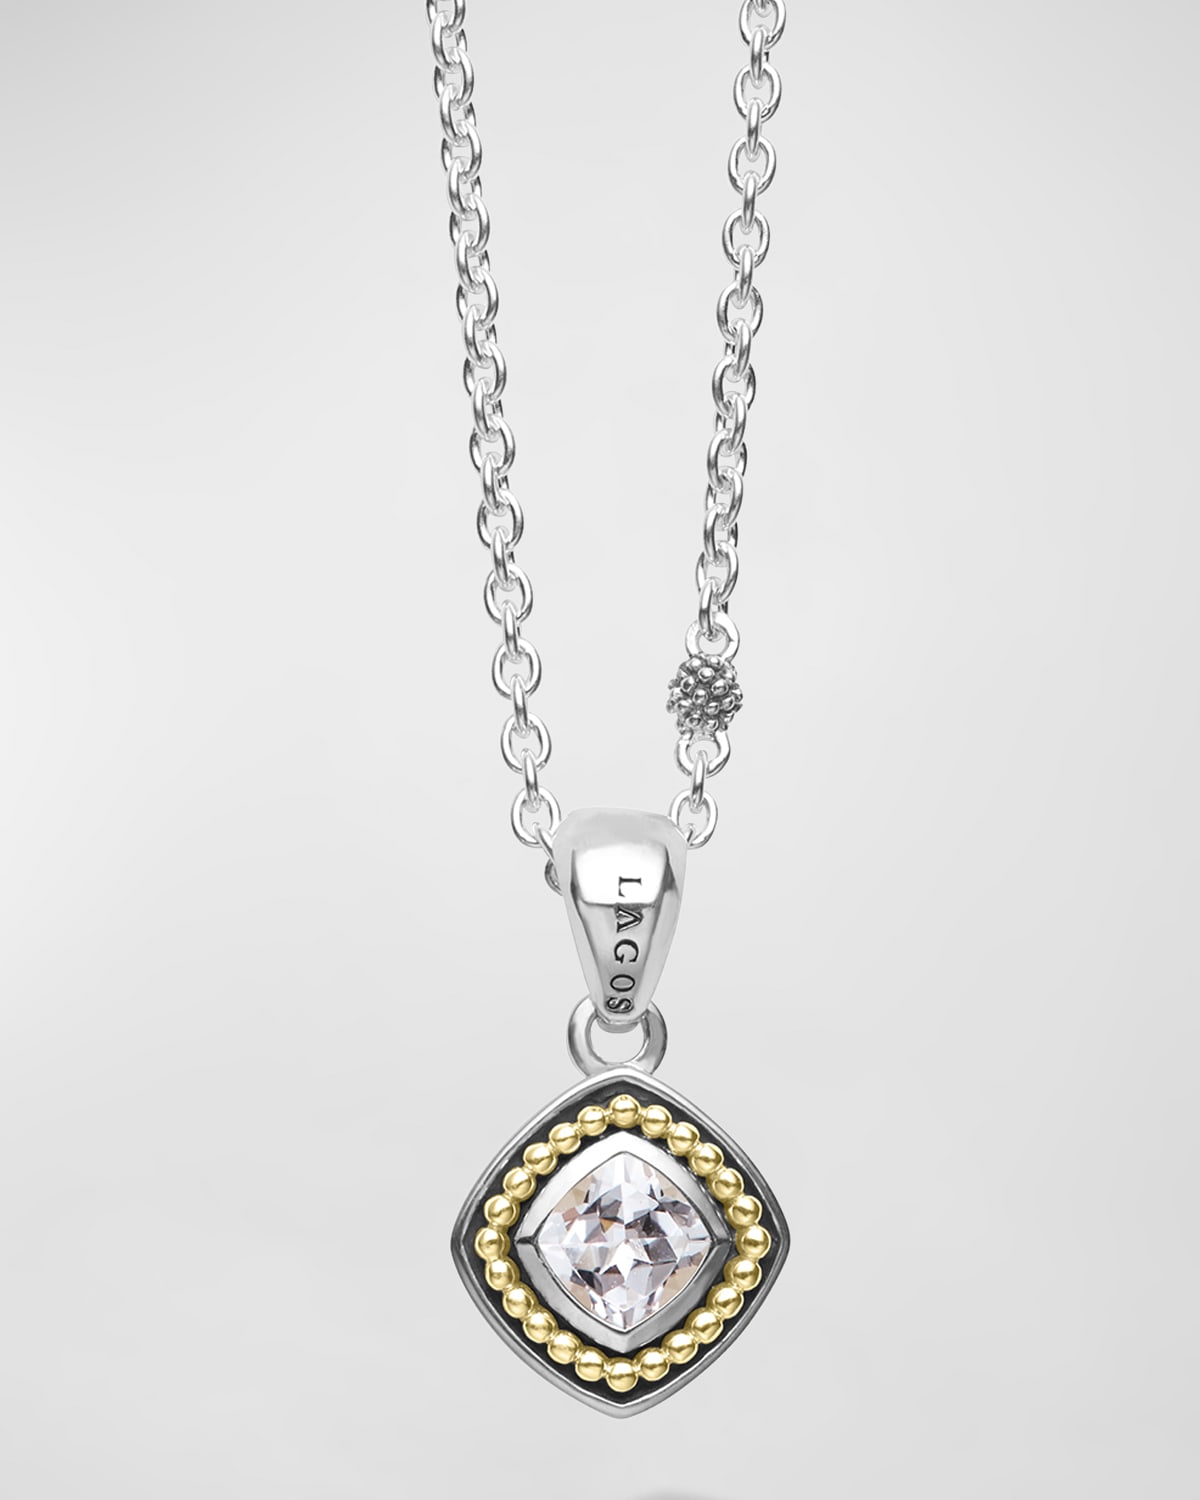 Silver Caviar Topaz Pendant Necklace with 18K Gold